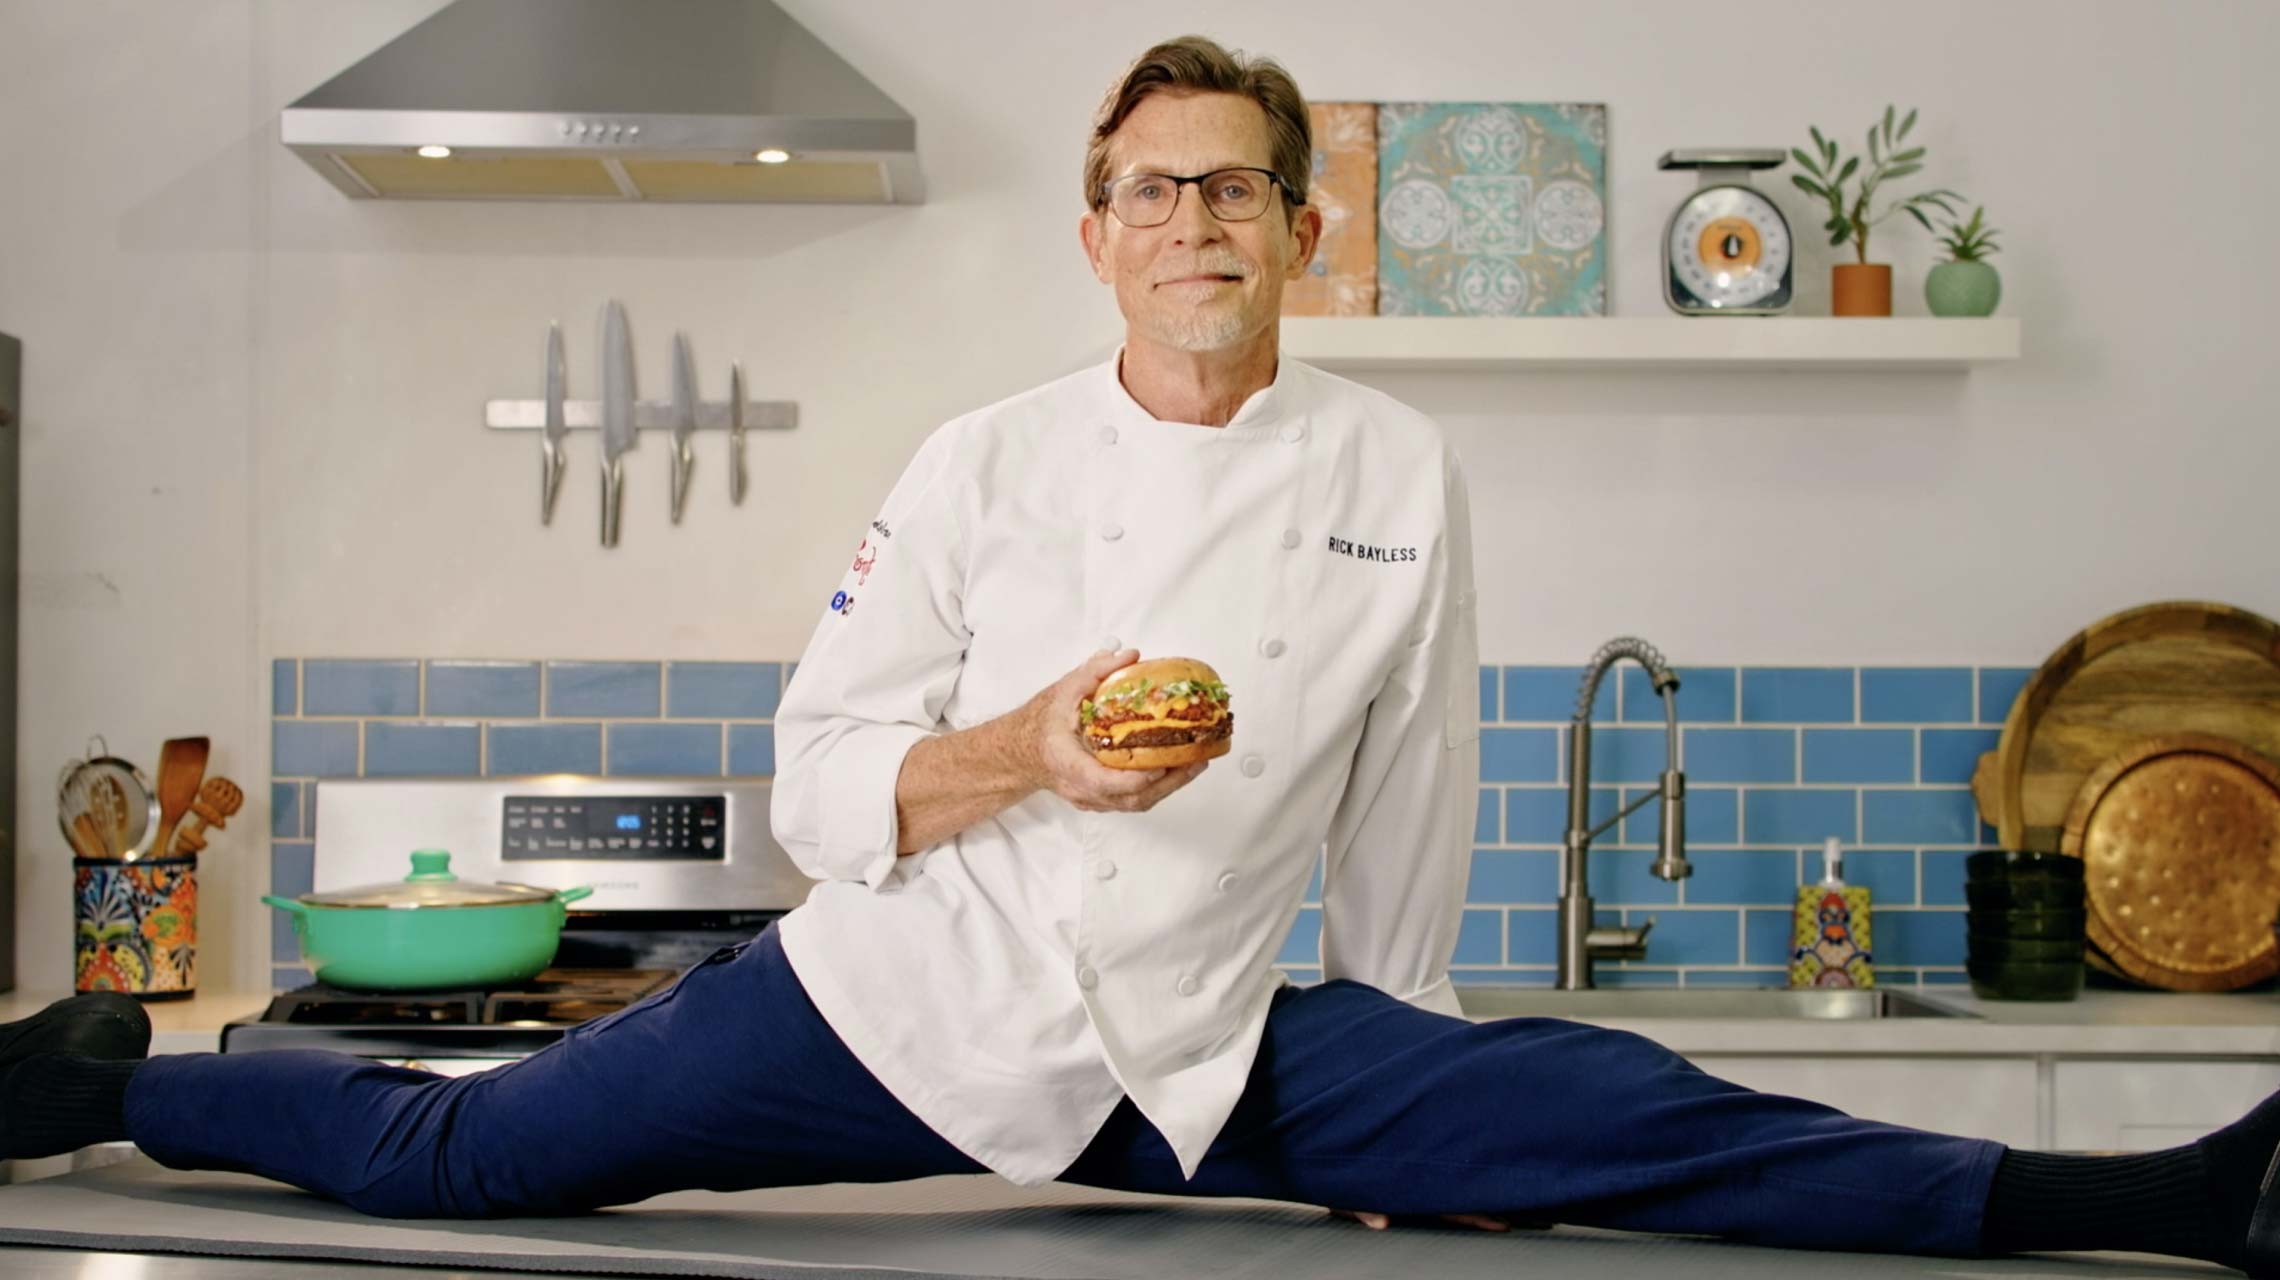 Click to view the "Rick Bayless" video.